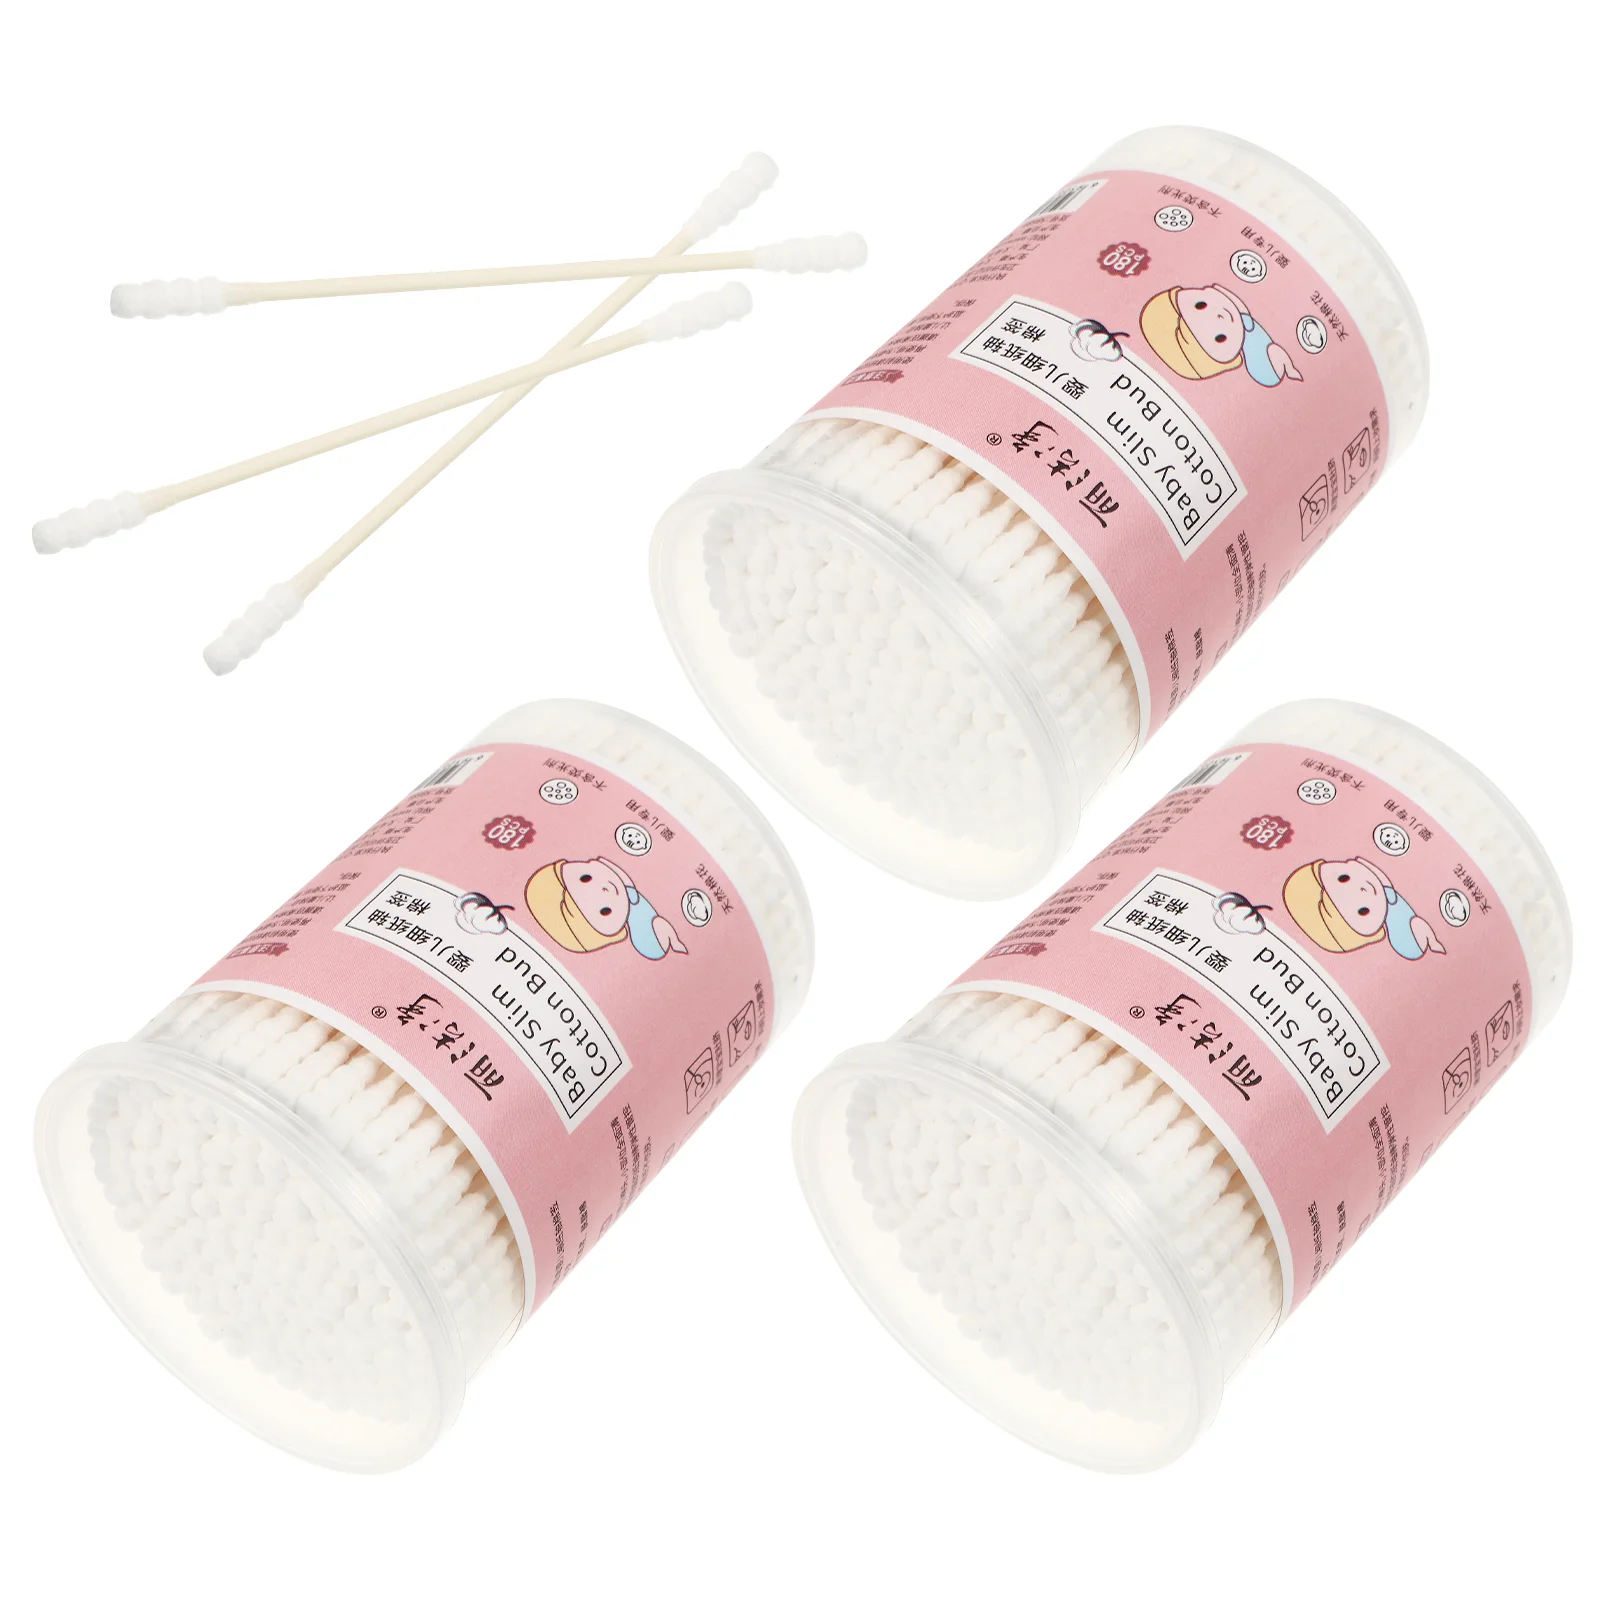 

3 Boxes Make Cotton Swab Baby Pet Cleaning Supplies Ear Caring Swabs Absorbent Buds Kids